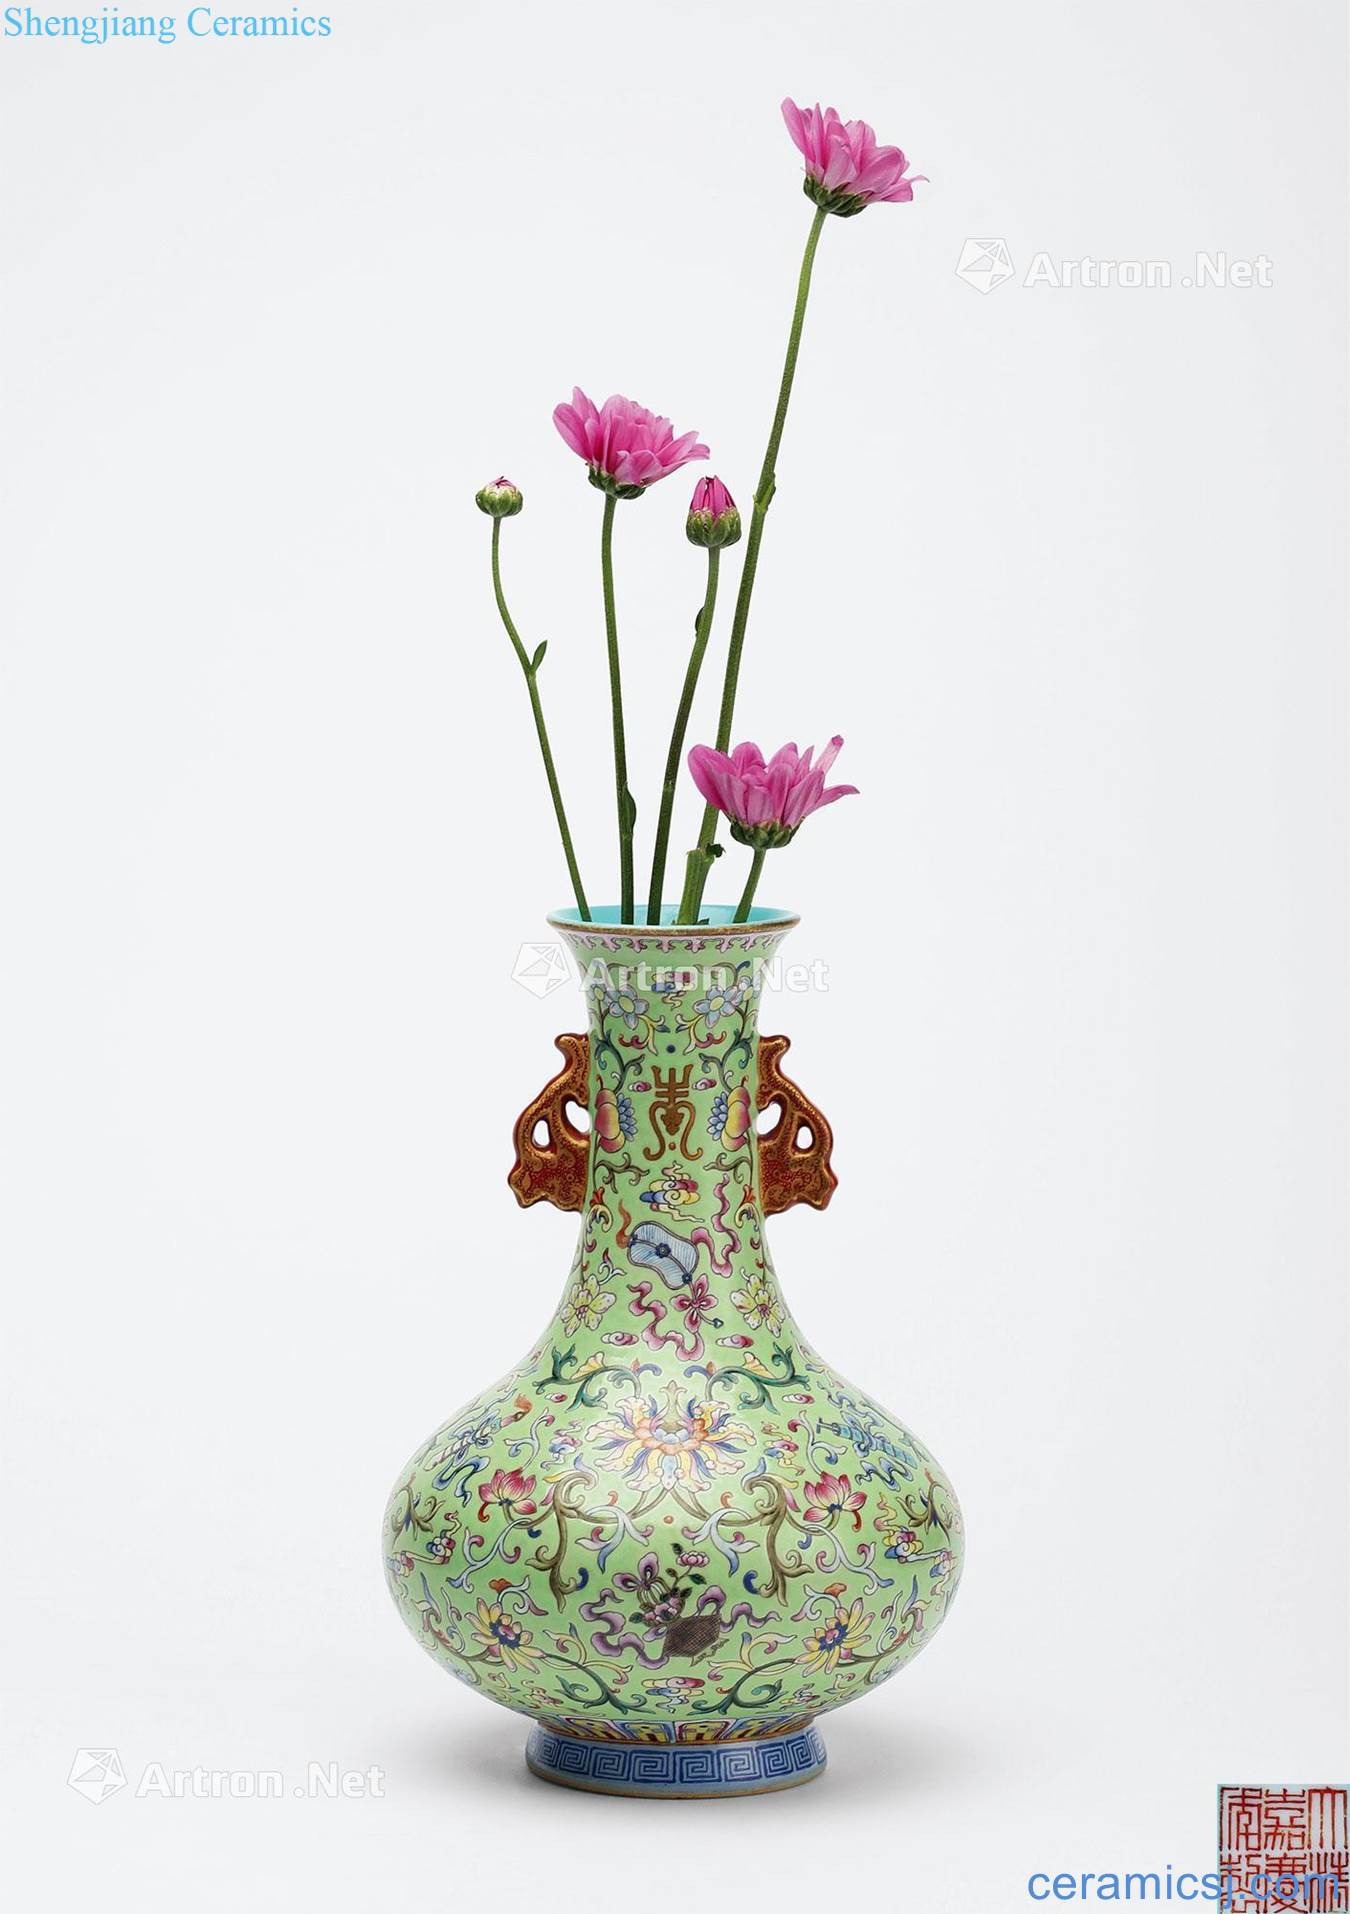 Qing jiaqing green enamel paint "dark" the eight immortals vase with a lotus flower therefore